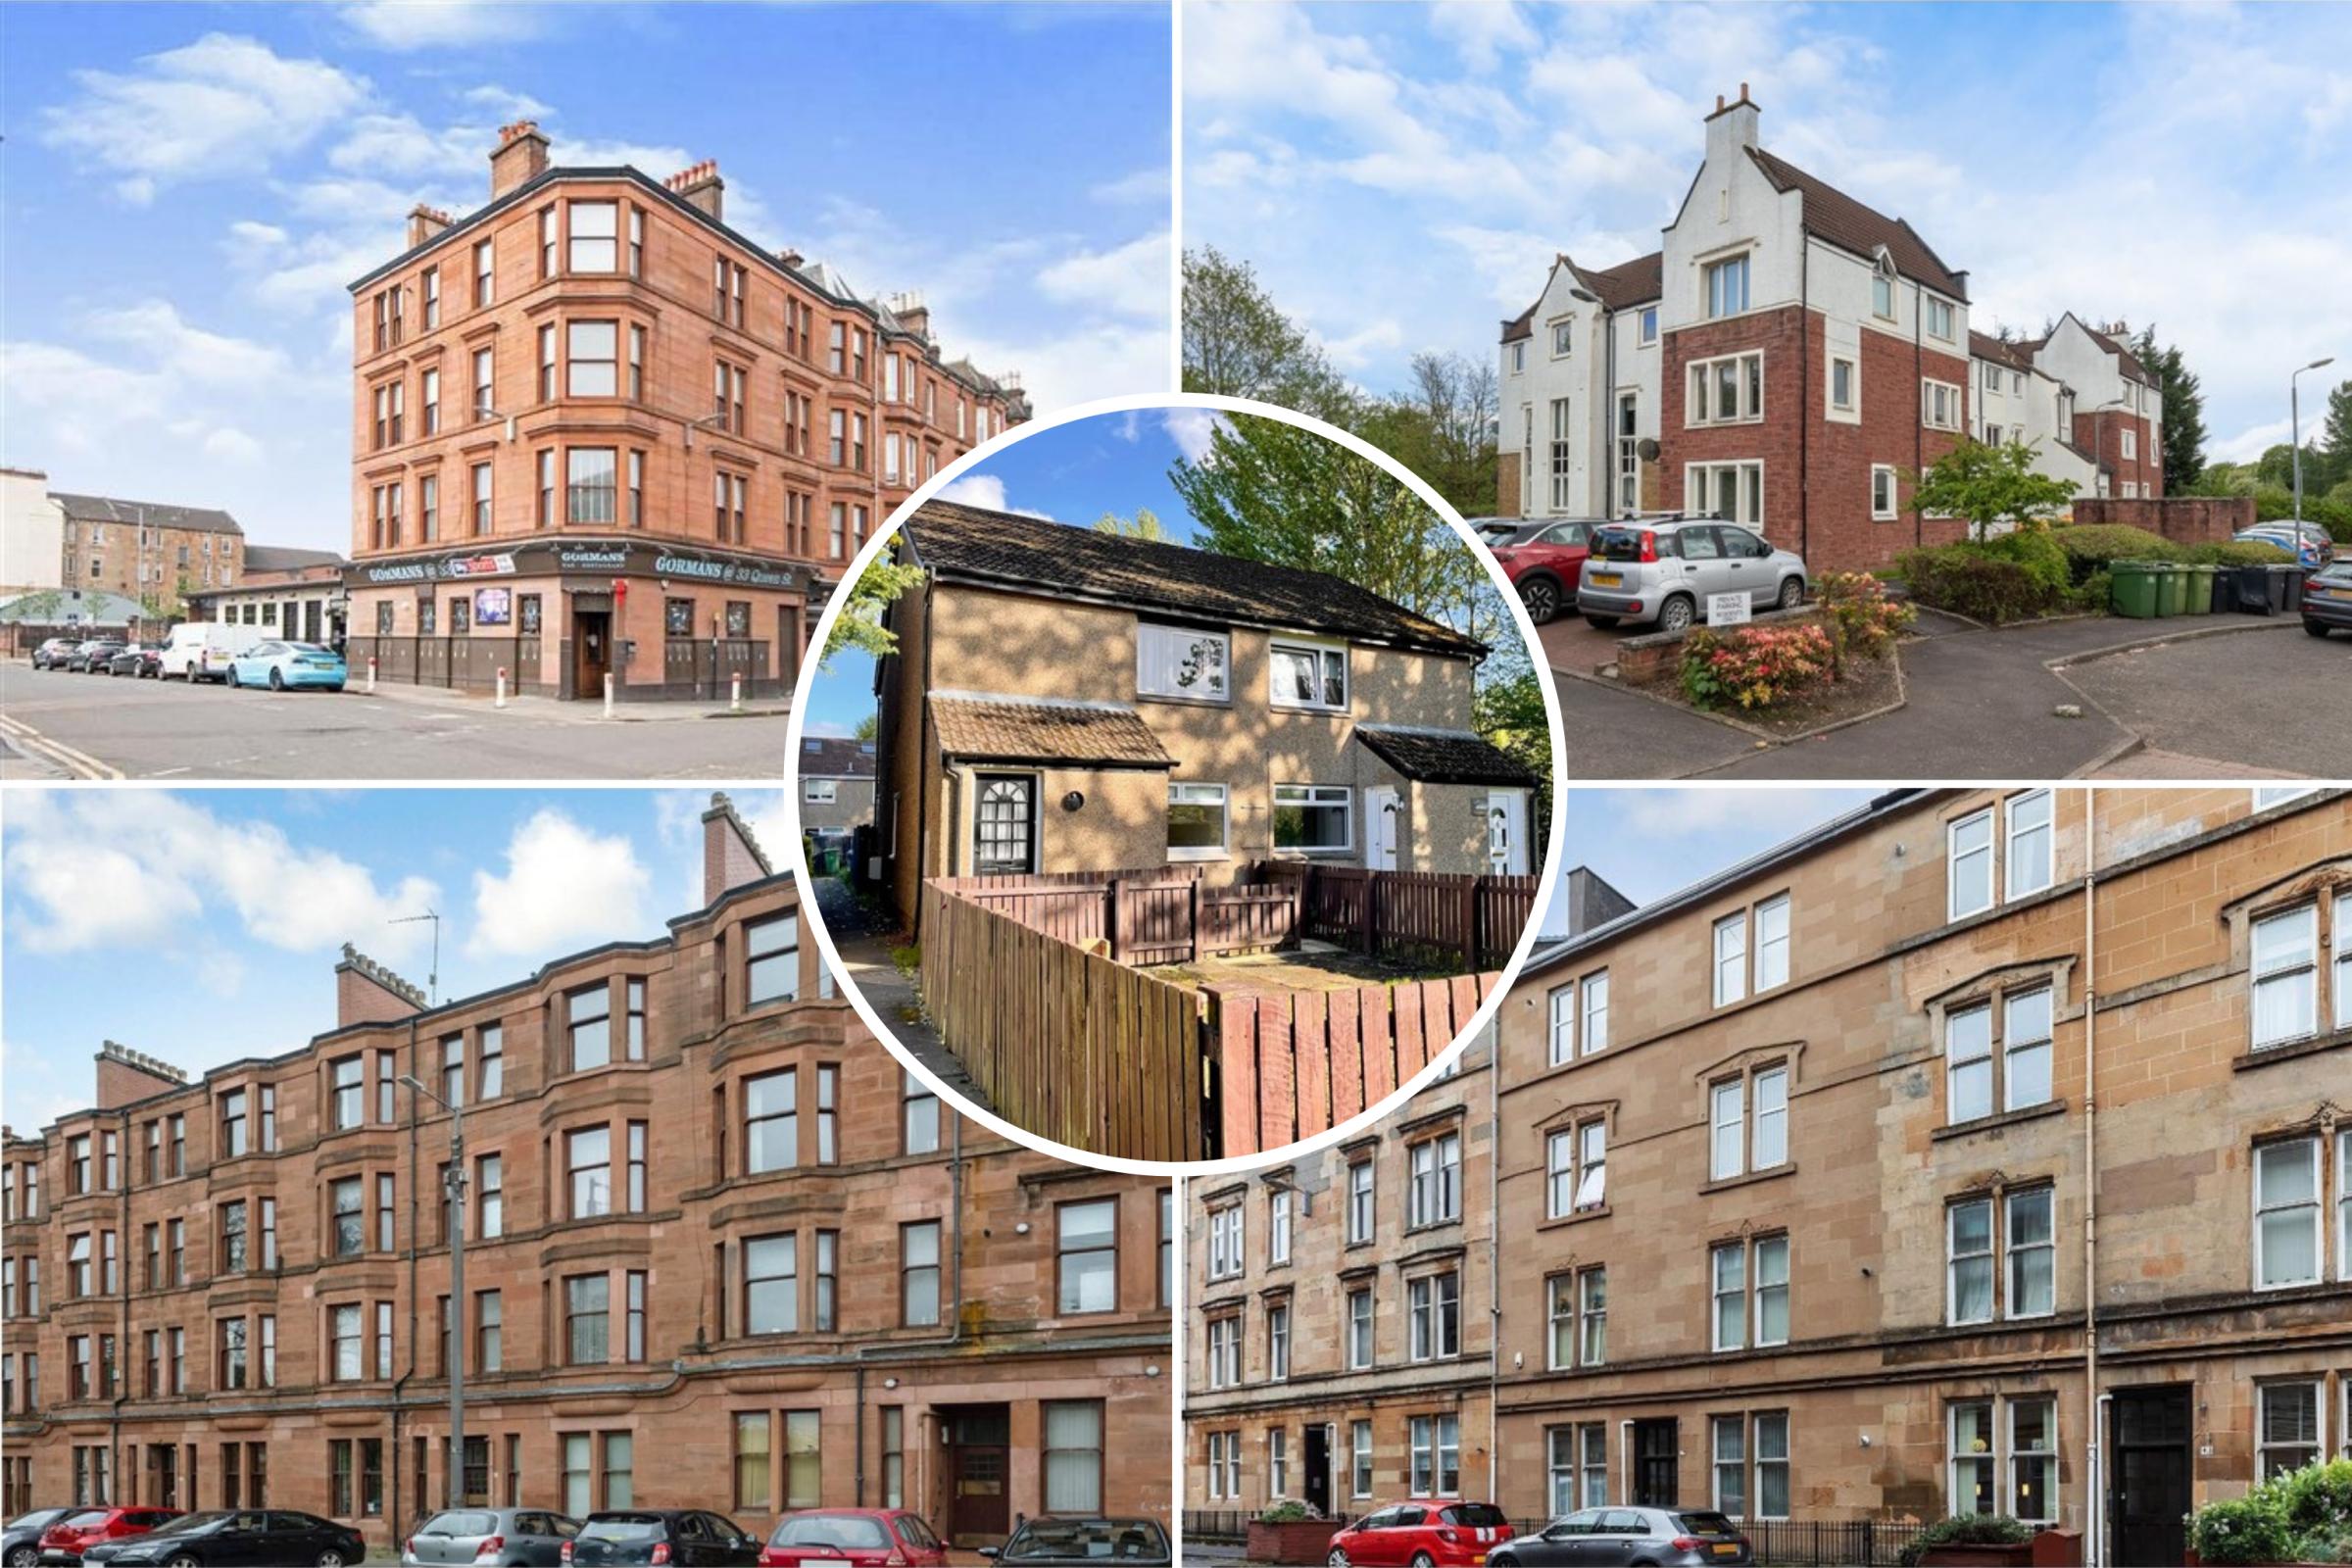 Five Glasgow flats on the market for £100k or less